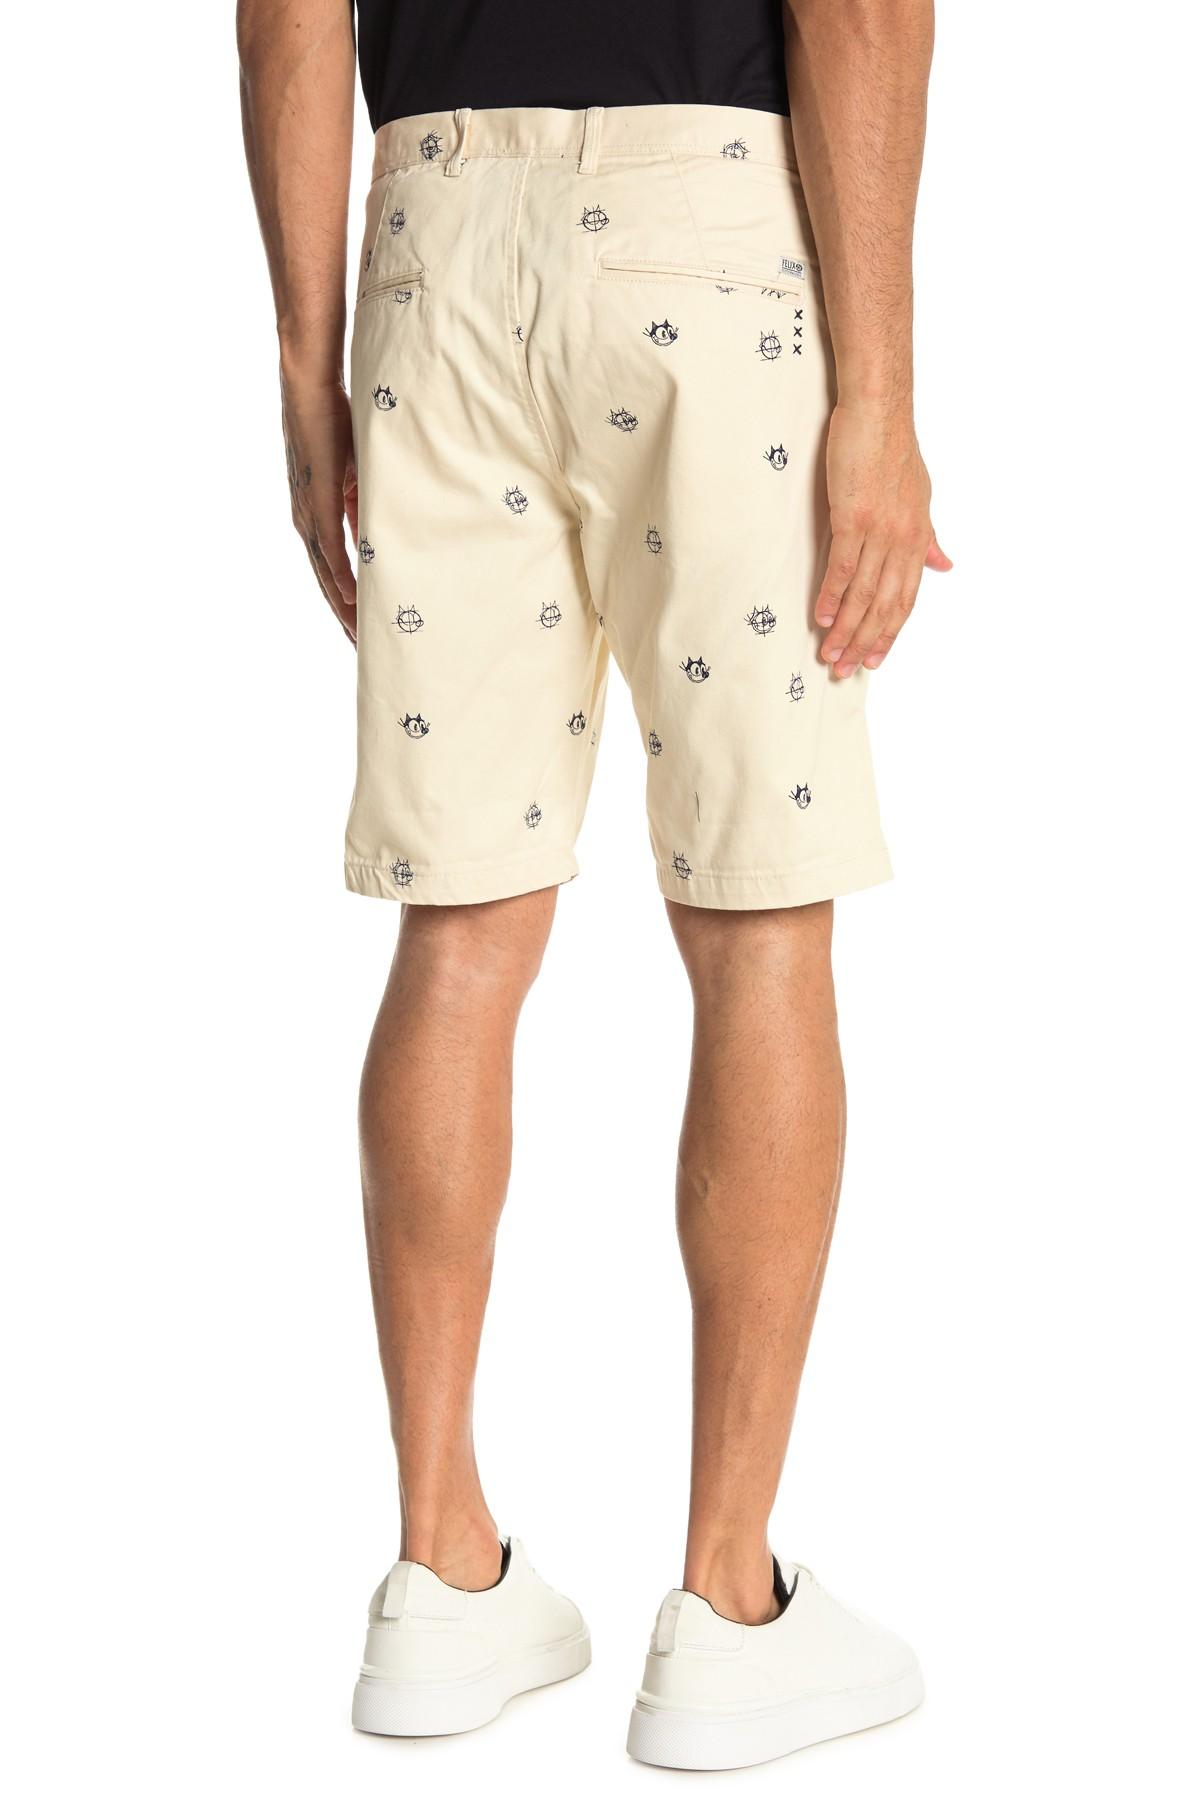 Scotch & Soda Cotton Felix The Cat Print Chino Shorts in 18-Combo b  (Natural) for Men - Lyst